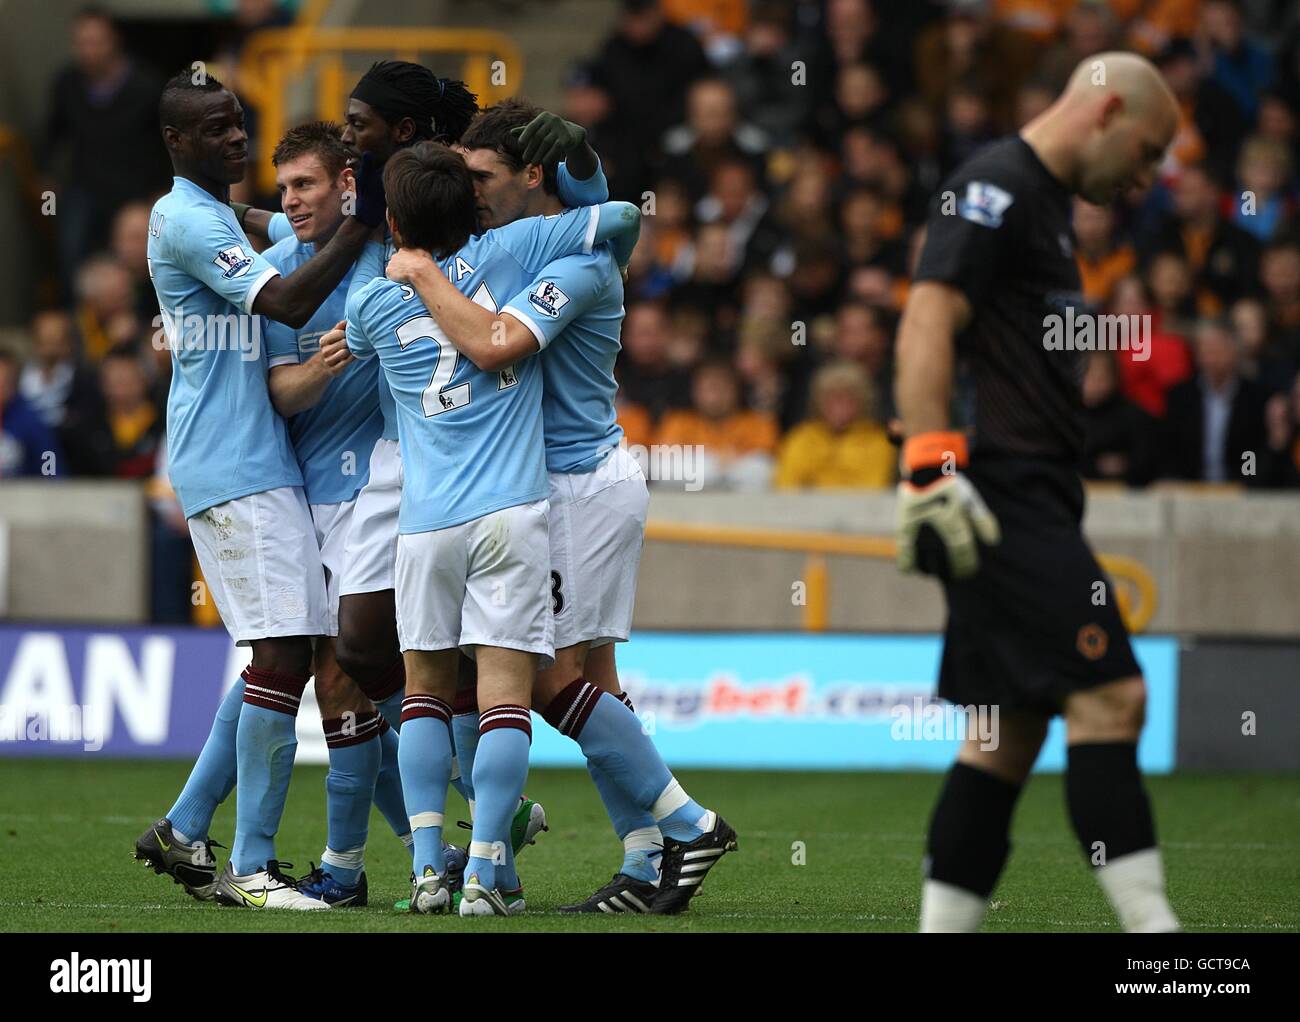 Manchester City's Emmanuel Adebayor celebrates scoring his sides first goal of the game with teammates as Wolverhampton Wanderers goalkeeper Marcus Hahnemann (right) stands dejected Stock Photo